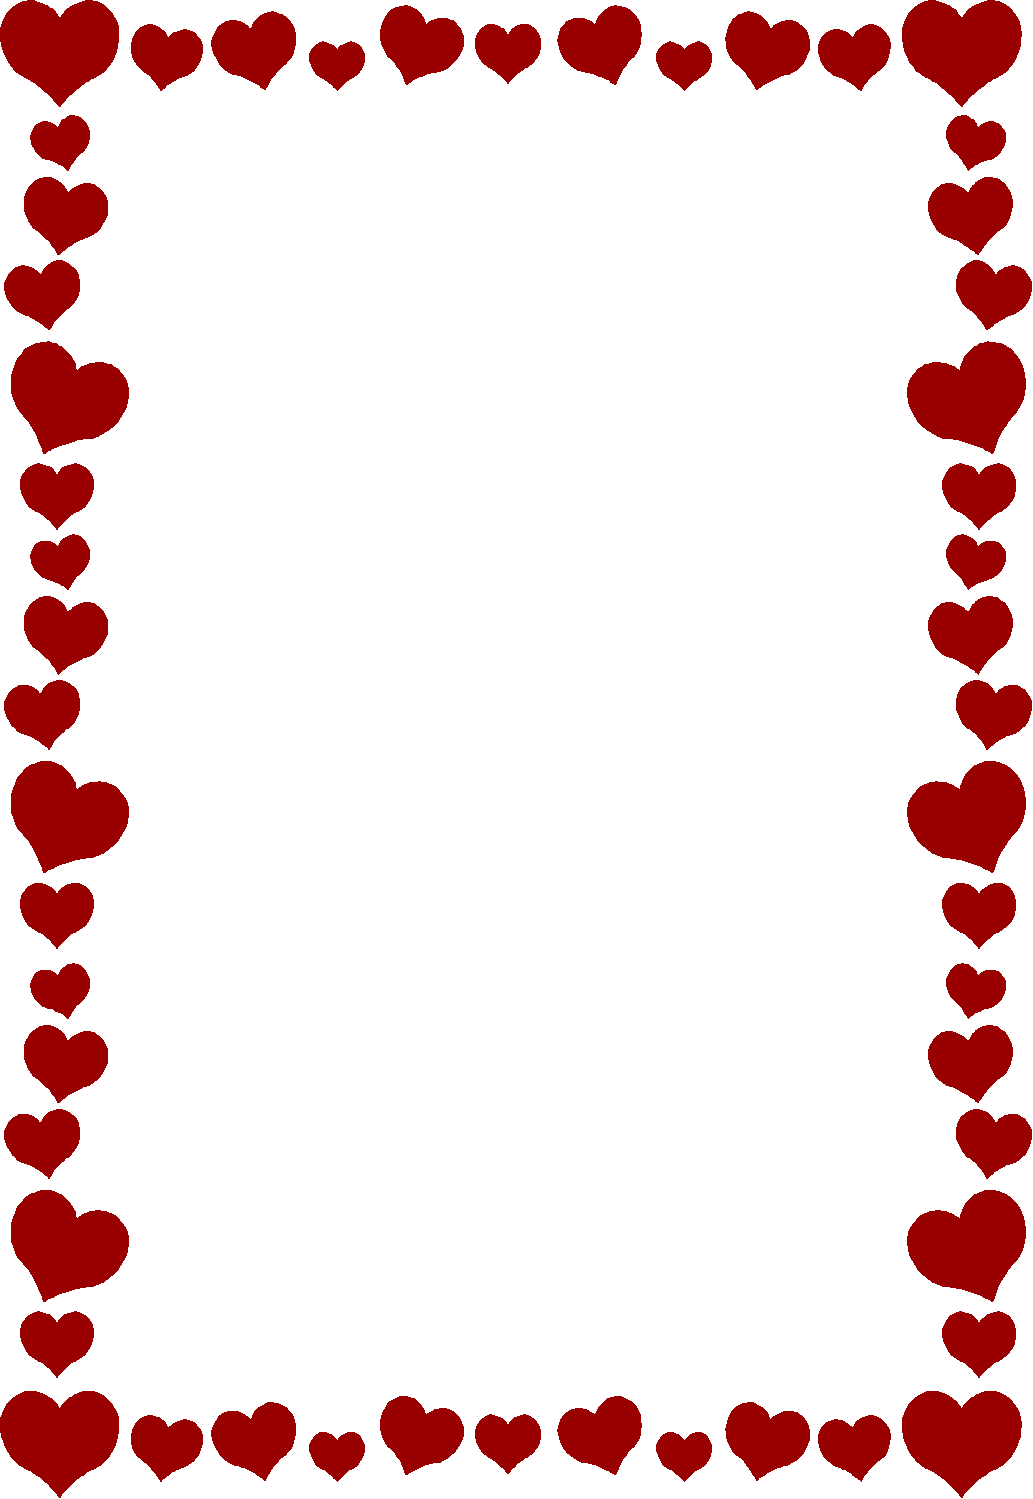 Red Heart Borders - ClipArt Best